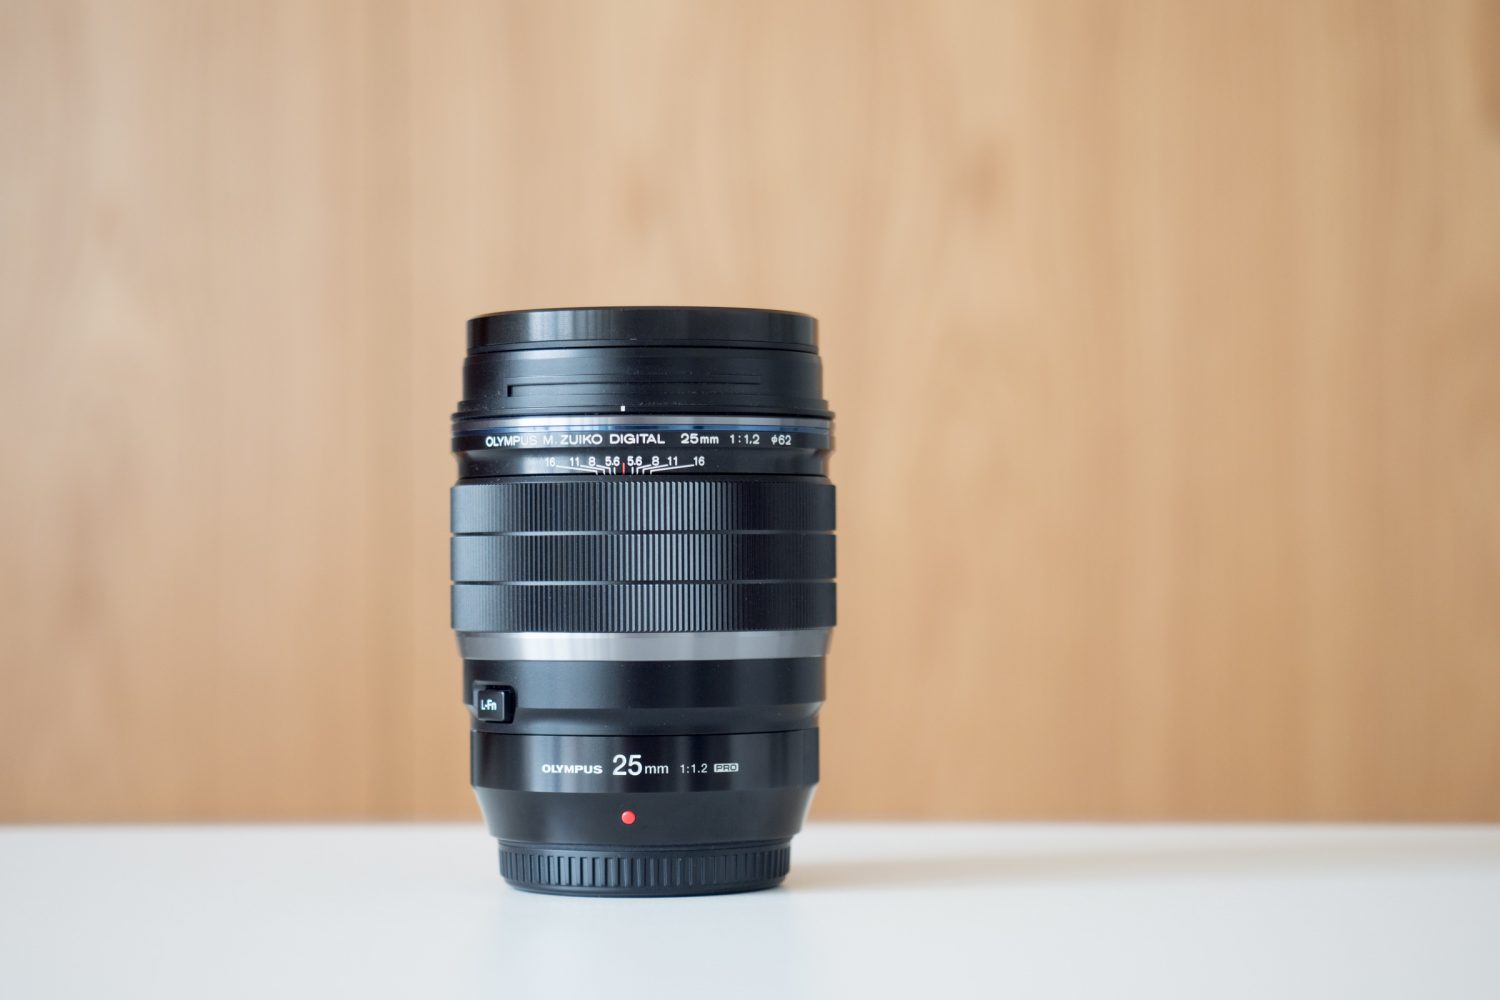 Olympus 25mm F1.2 PRO Lens Review